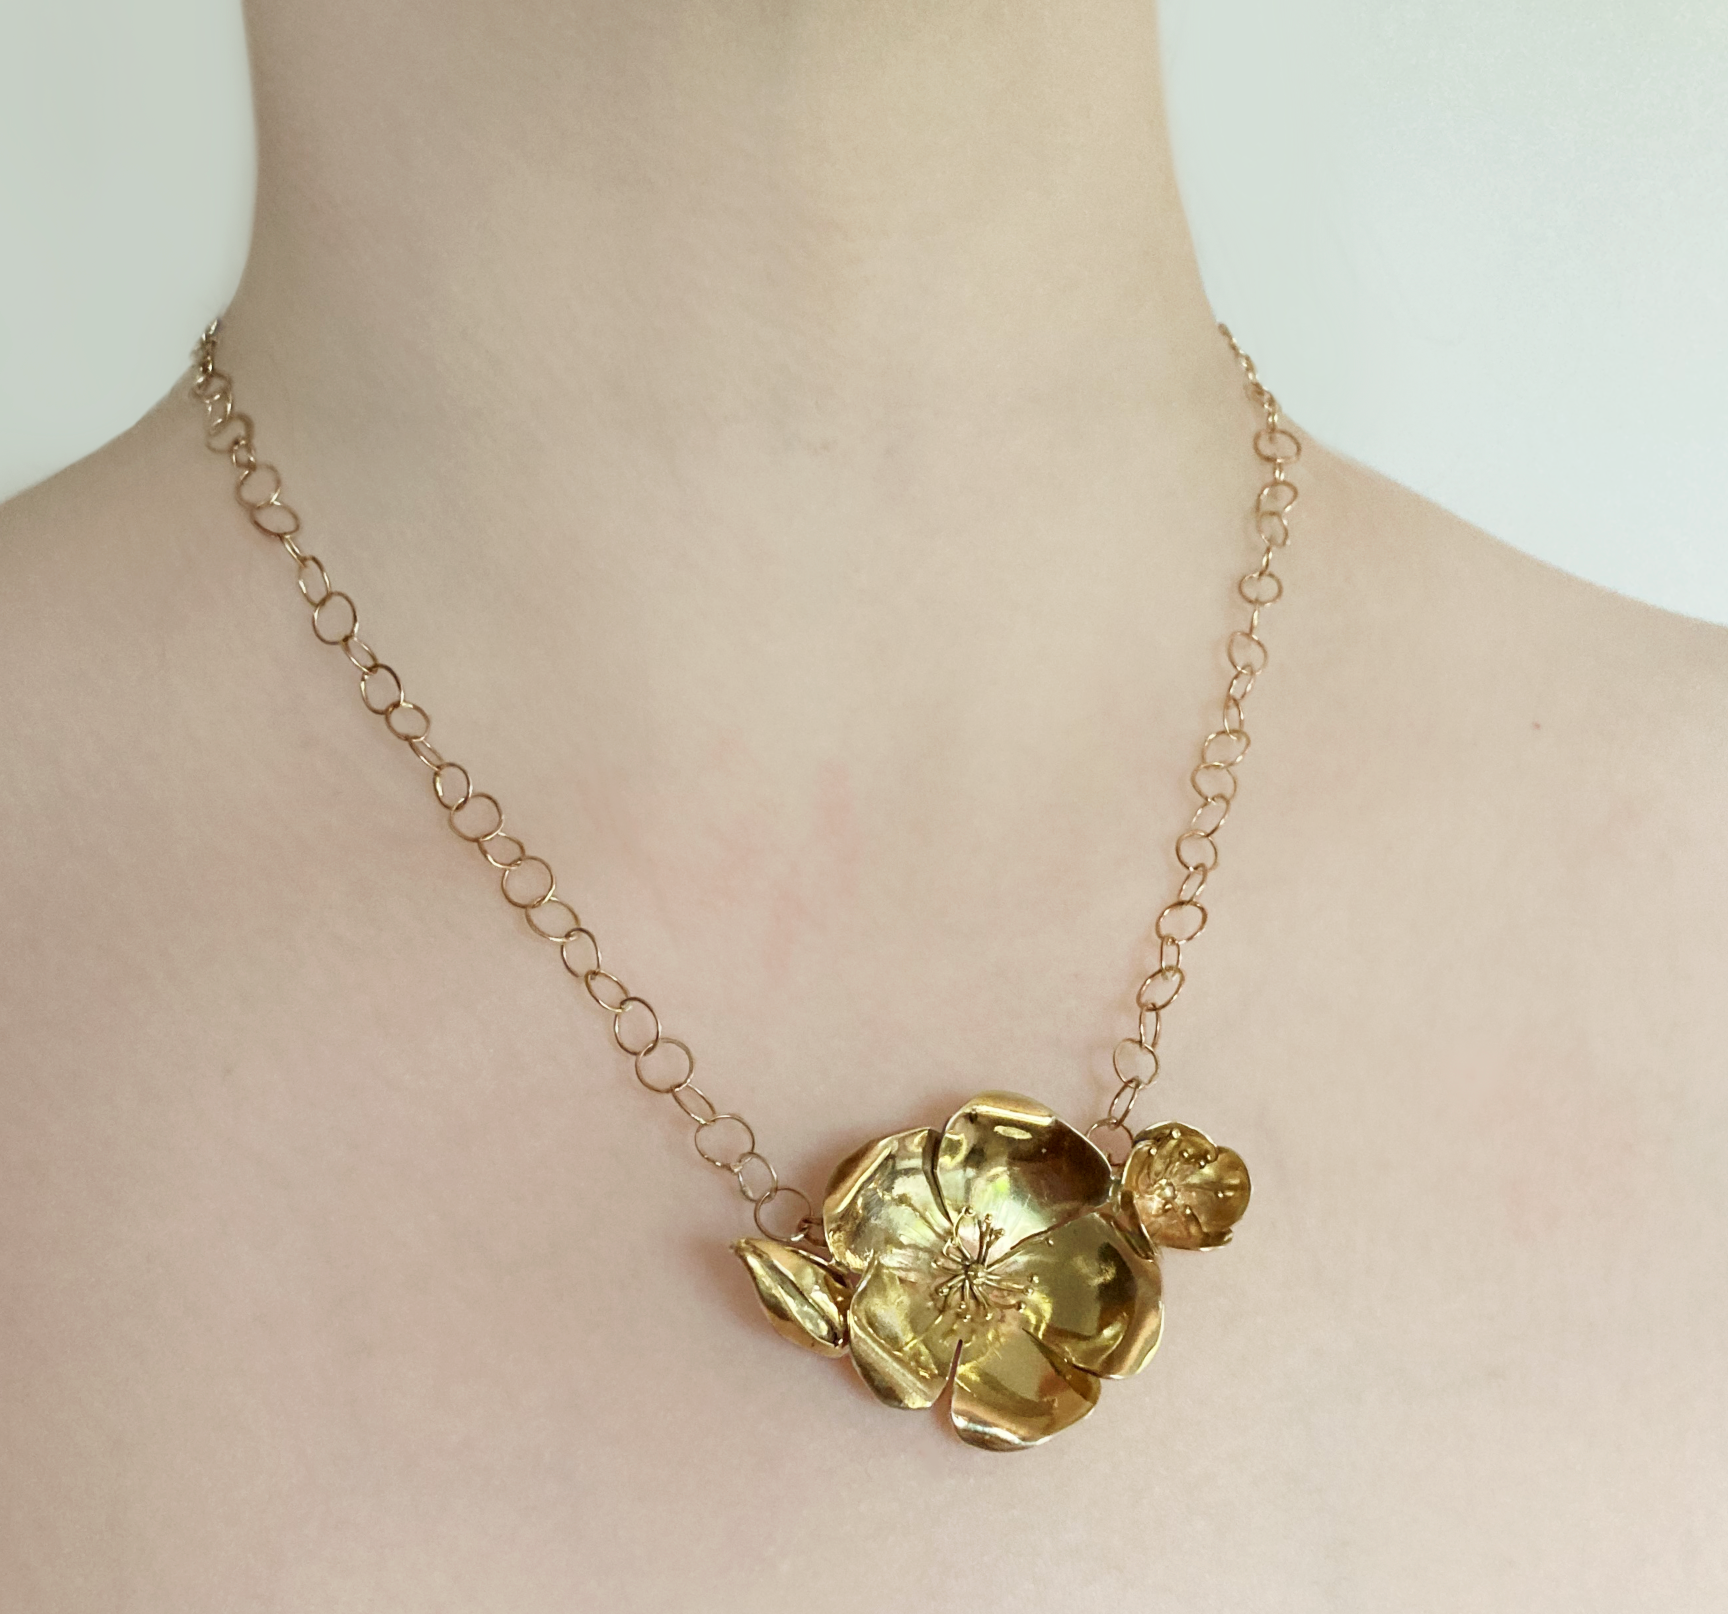 woman's neck wearing big gold rose pendant and open link gold chain